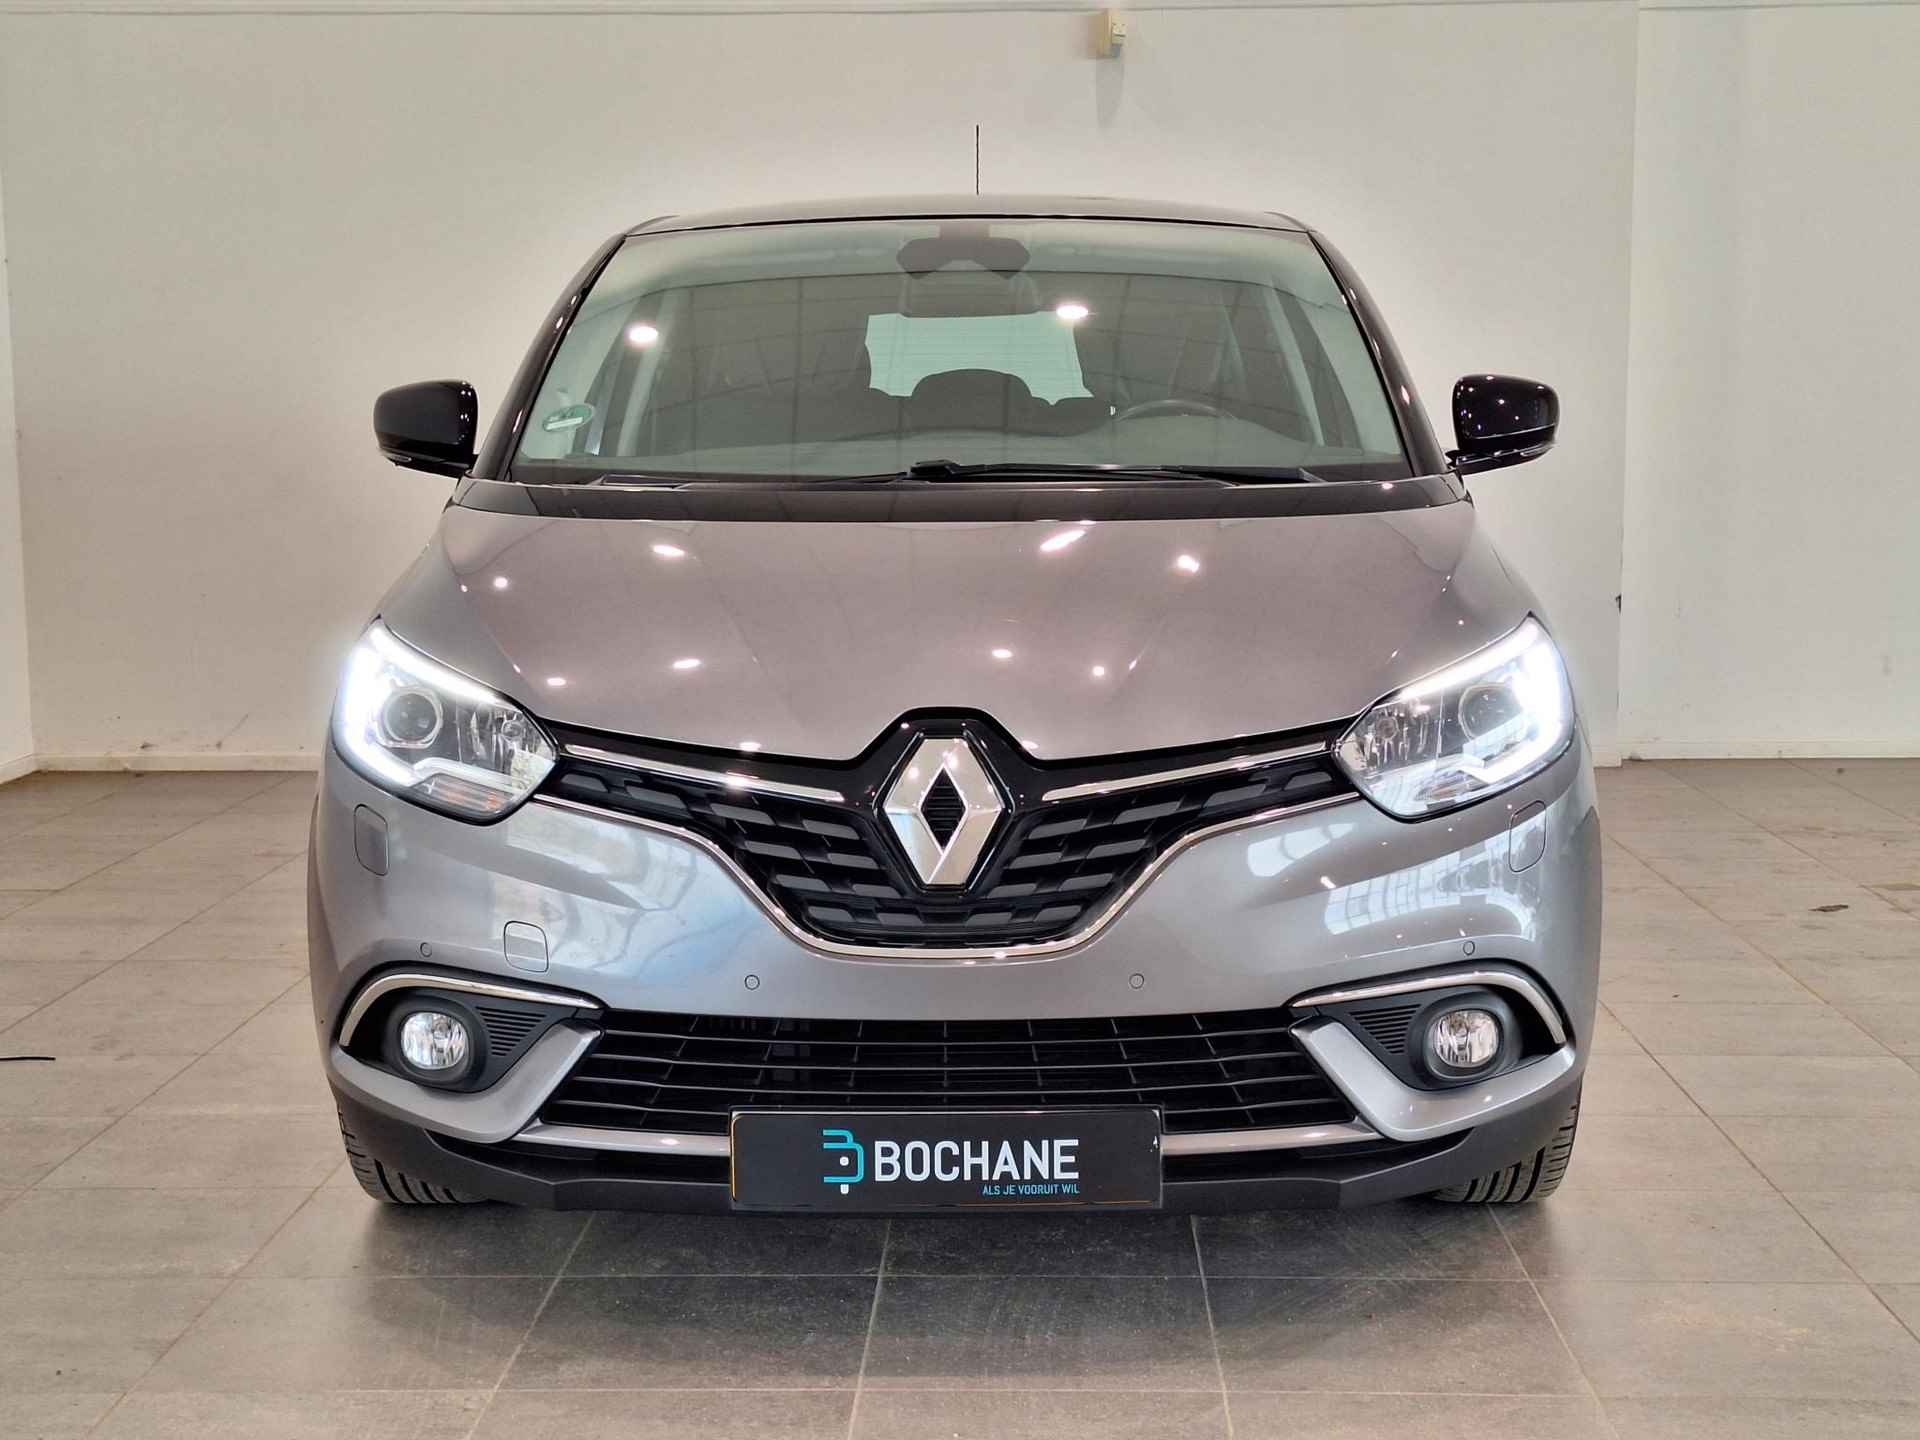 Renault Scénic 1.2 TCe 130 Bose CLIMA | CRUISE | GROOTSCHERM NAVI | V+A PDC | STOELVERWARMING - 5/28